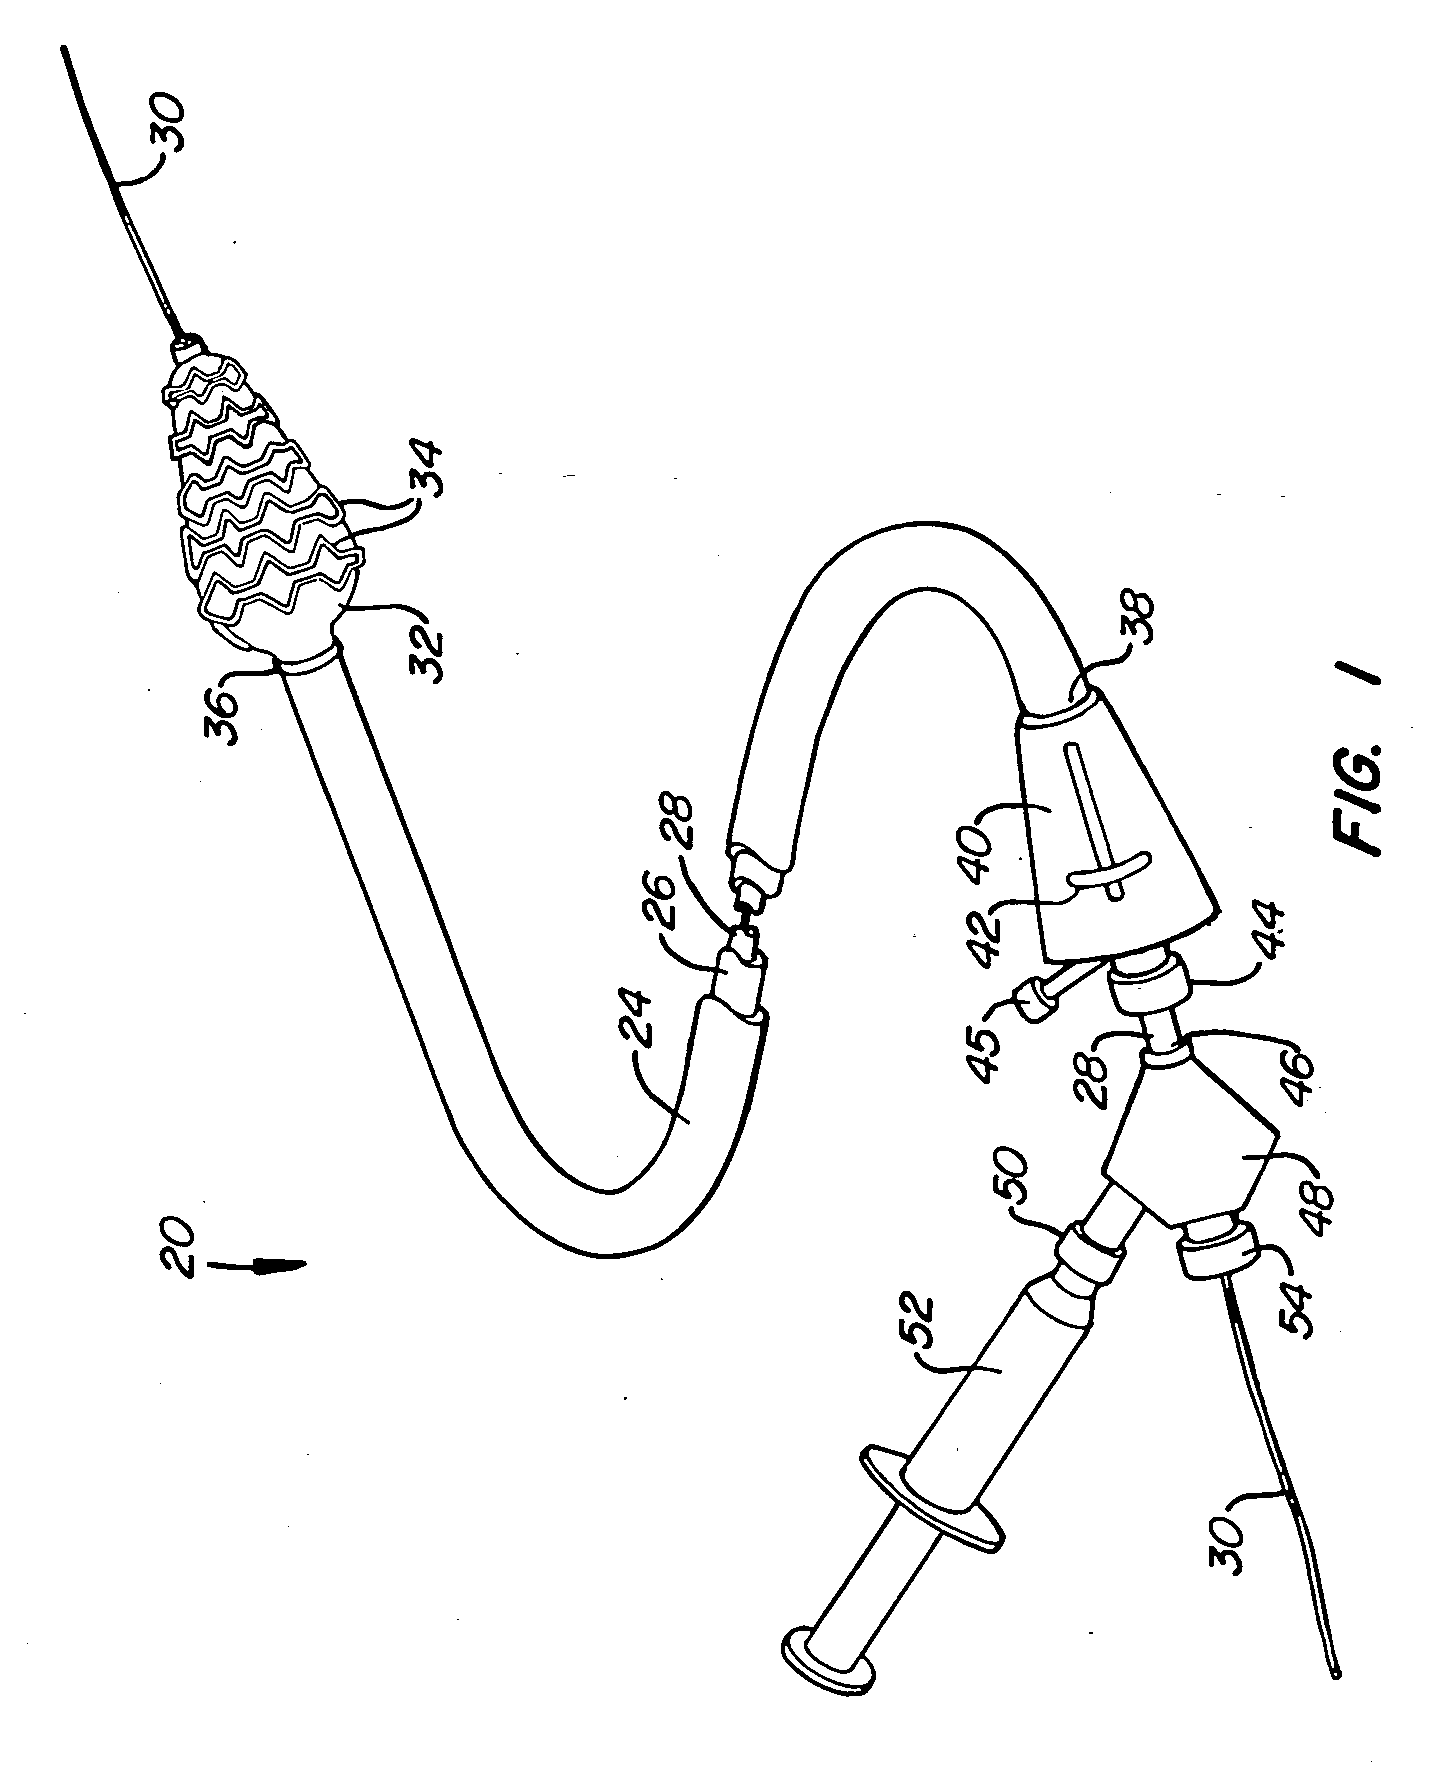 Stent deployment systems and methods